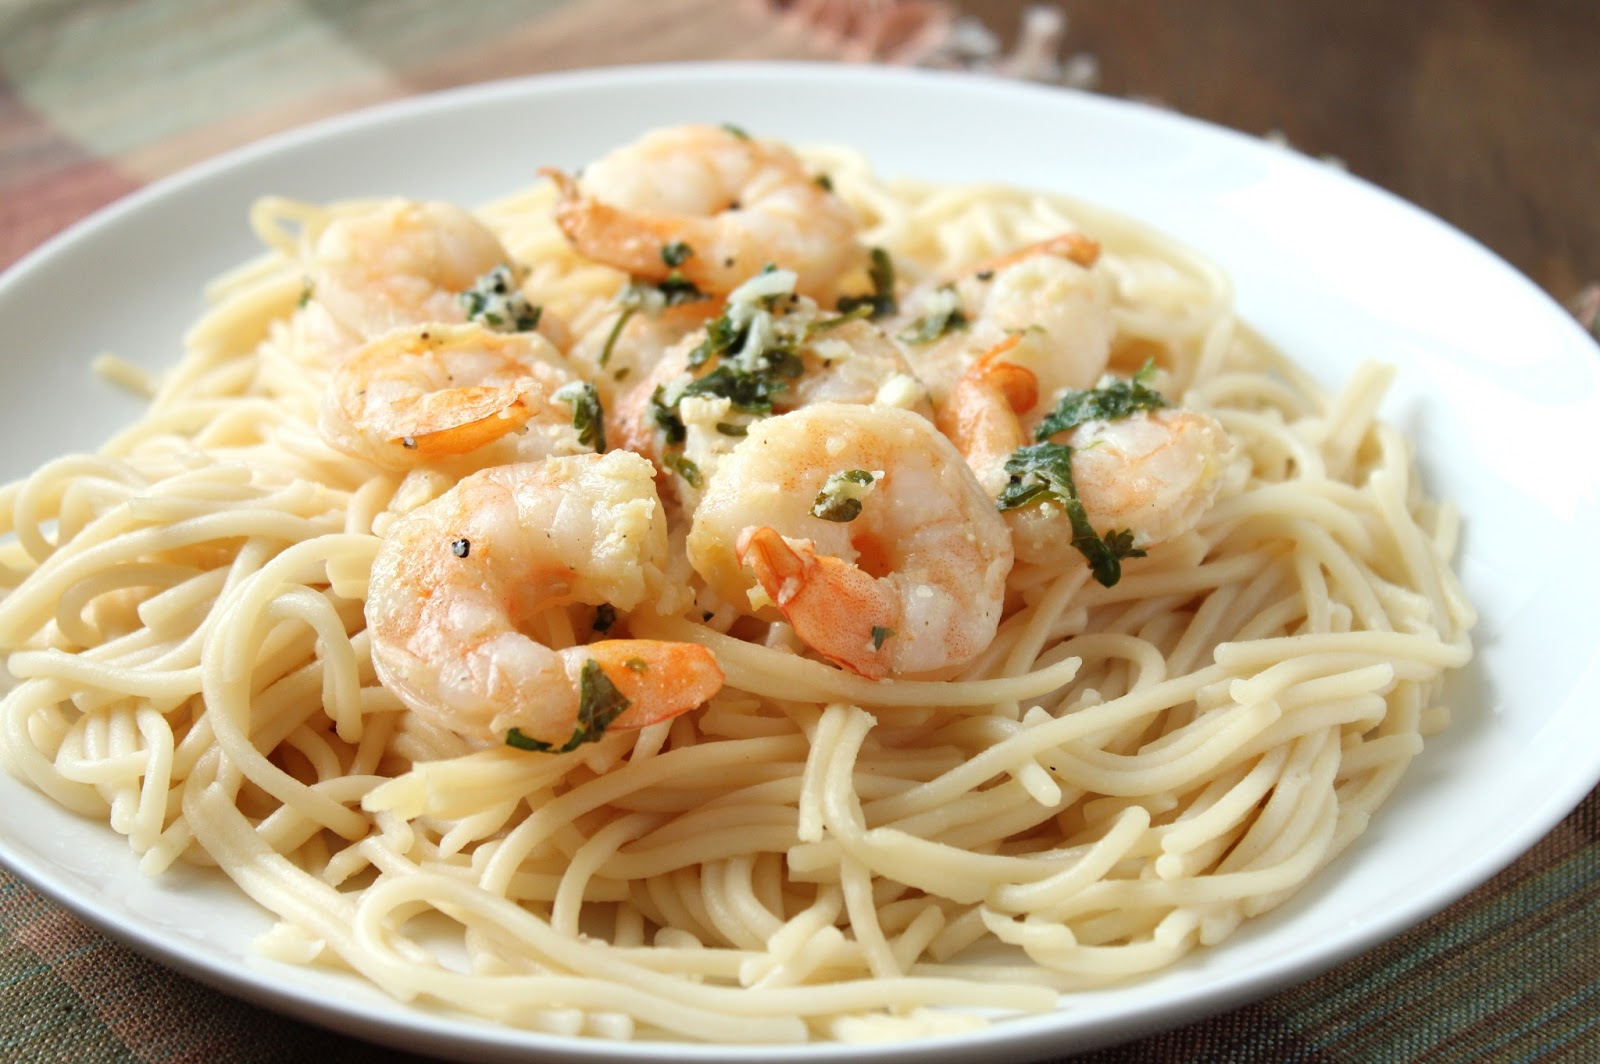 Shrimp Scampi Bake - Delicious as it Looks